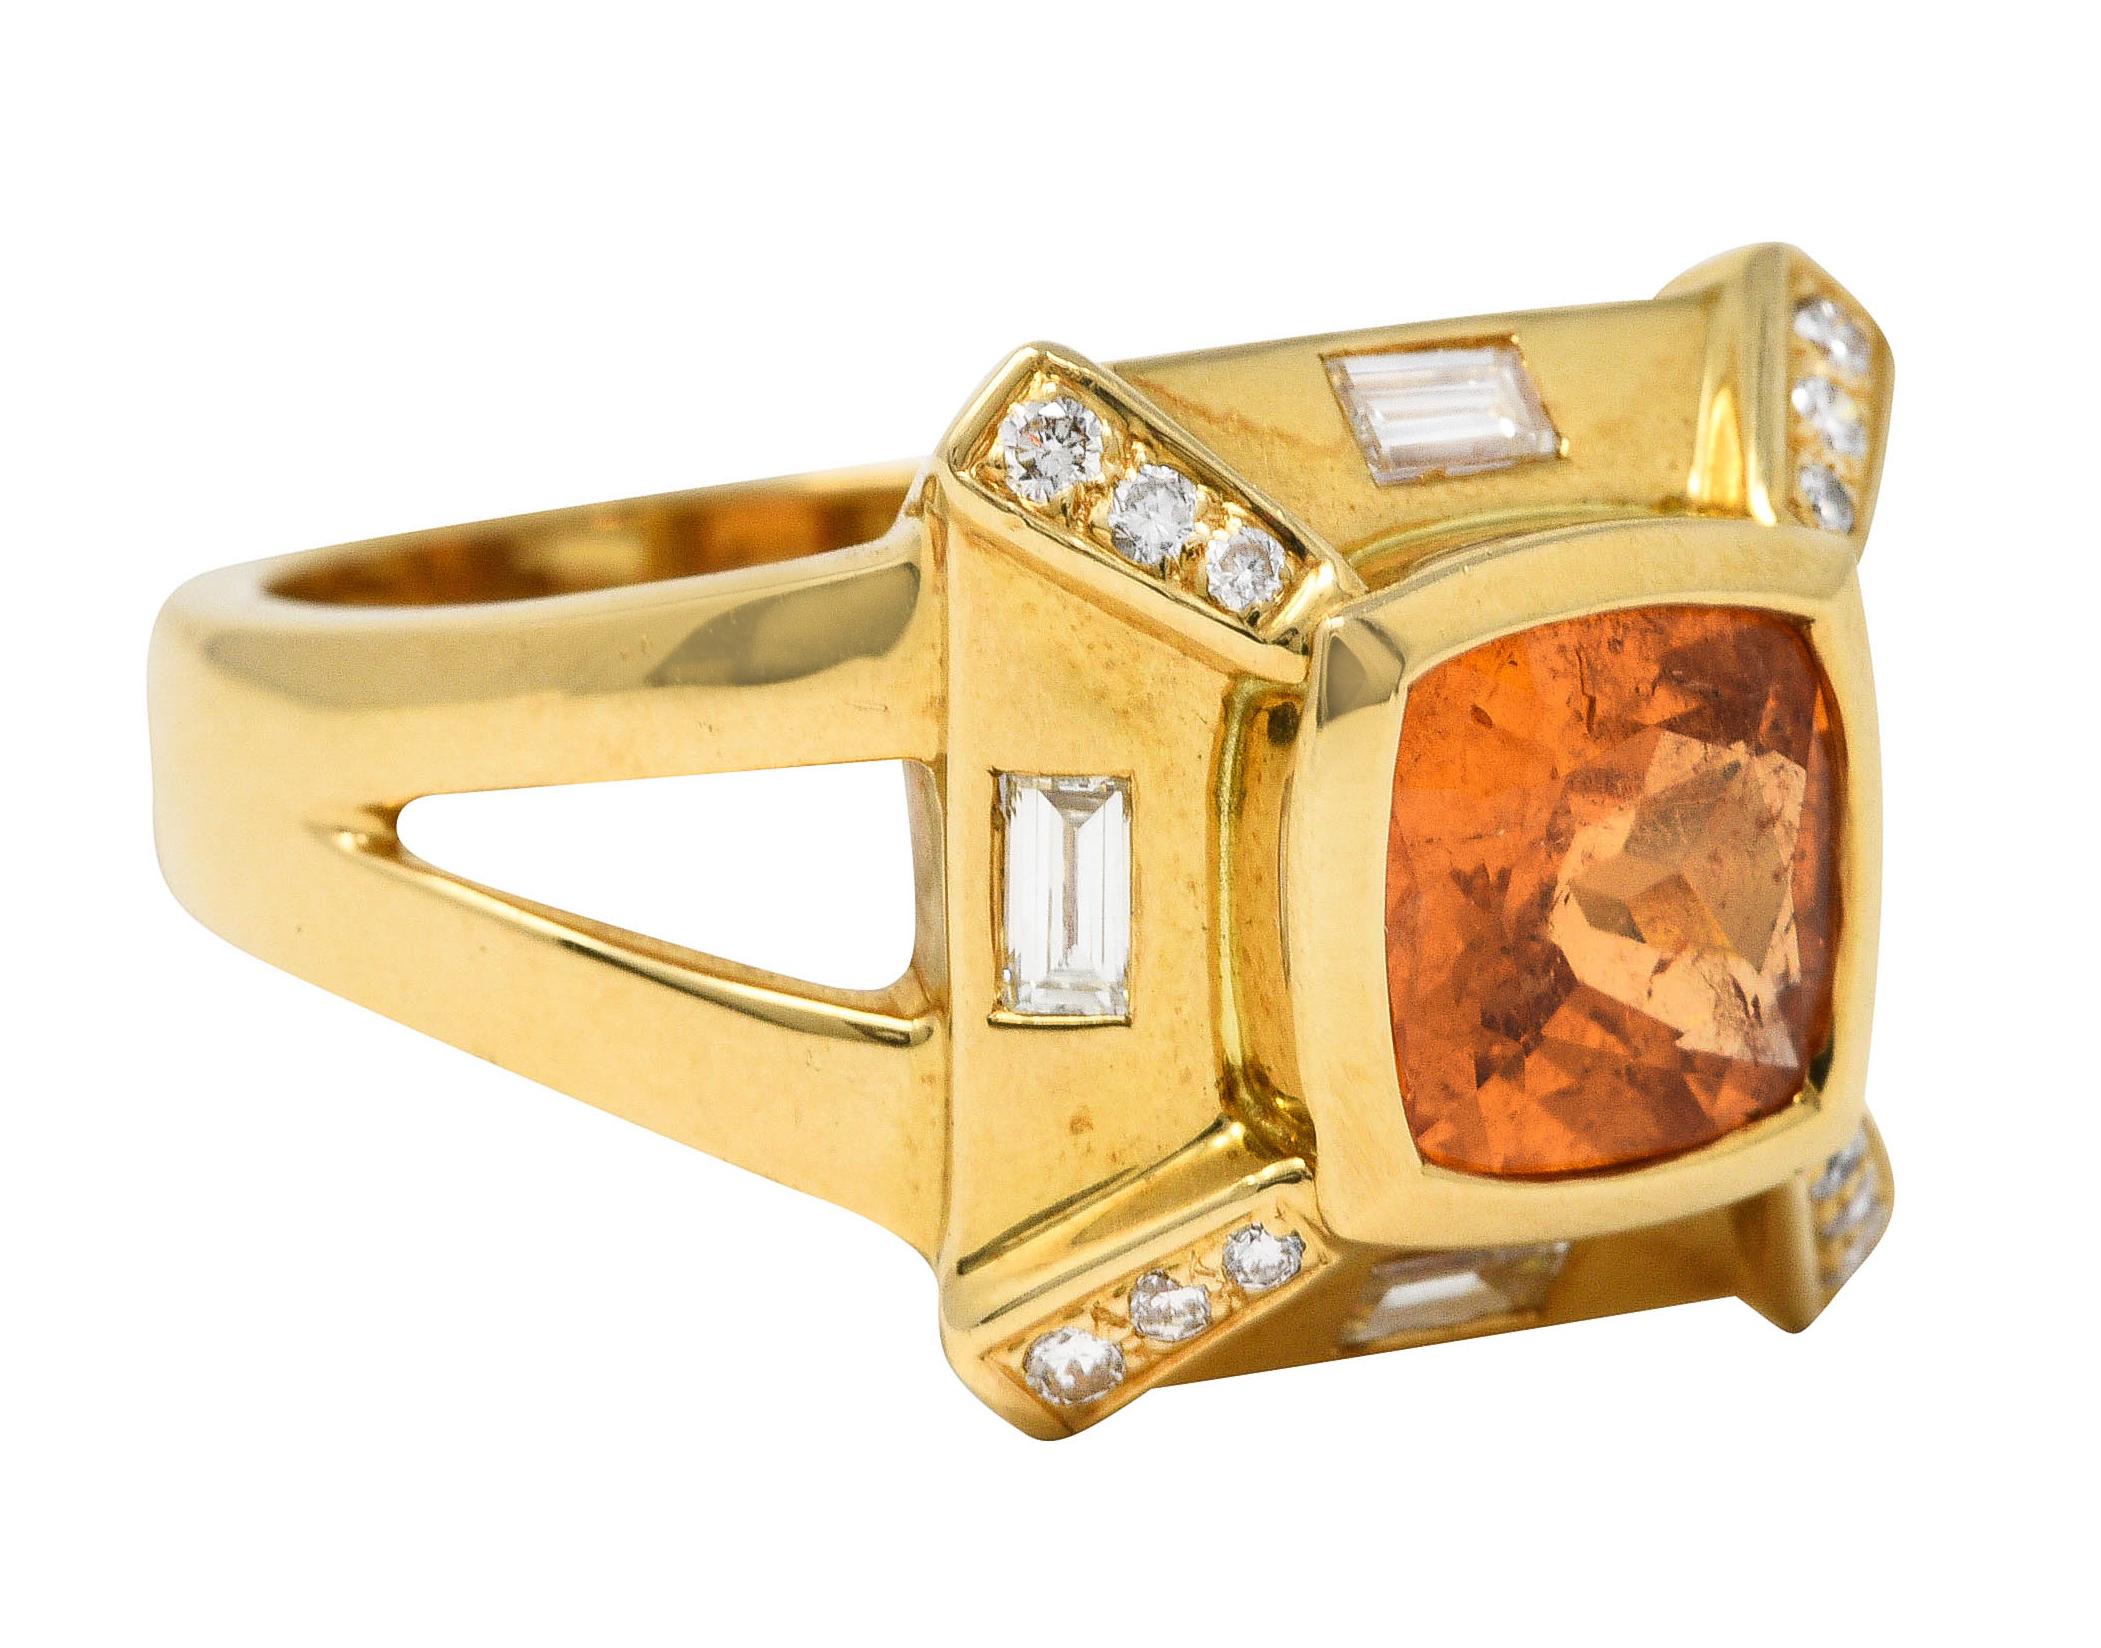 Centering a cushion cut orange sapphire weighing approximately 2.00 carats

Semi-transparent with natural inclusions while exhibiting uniform and vibrant orange color

Bezel set in a pyramidal form accented by baguette and round brilliant cut